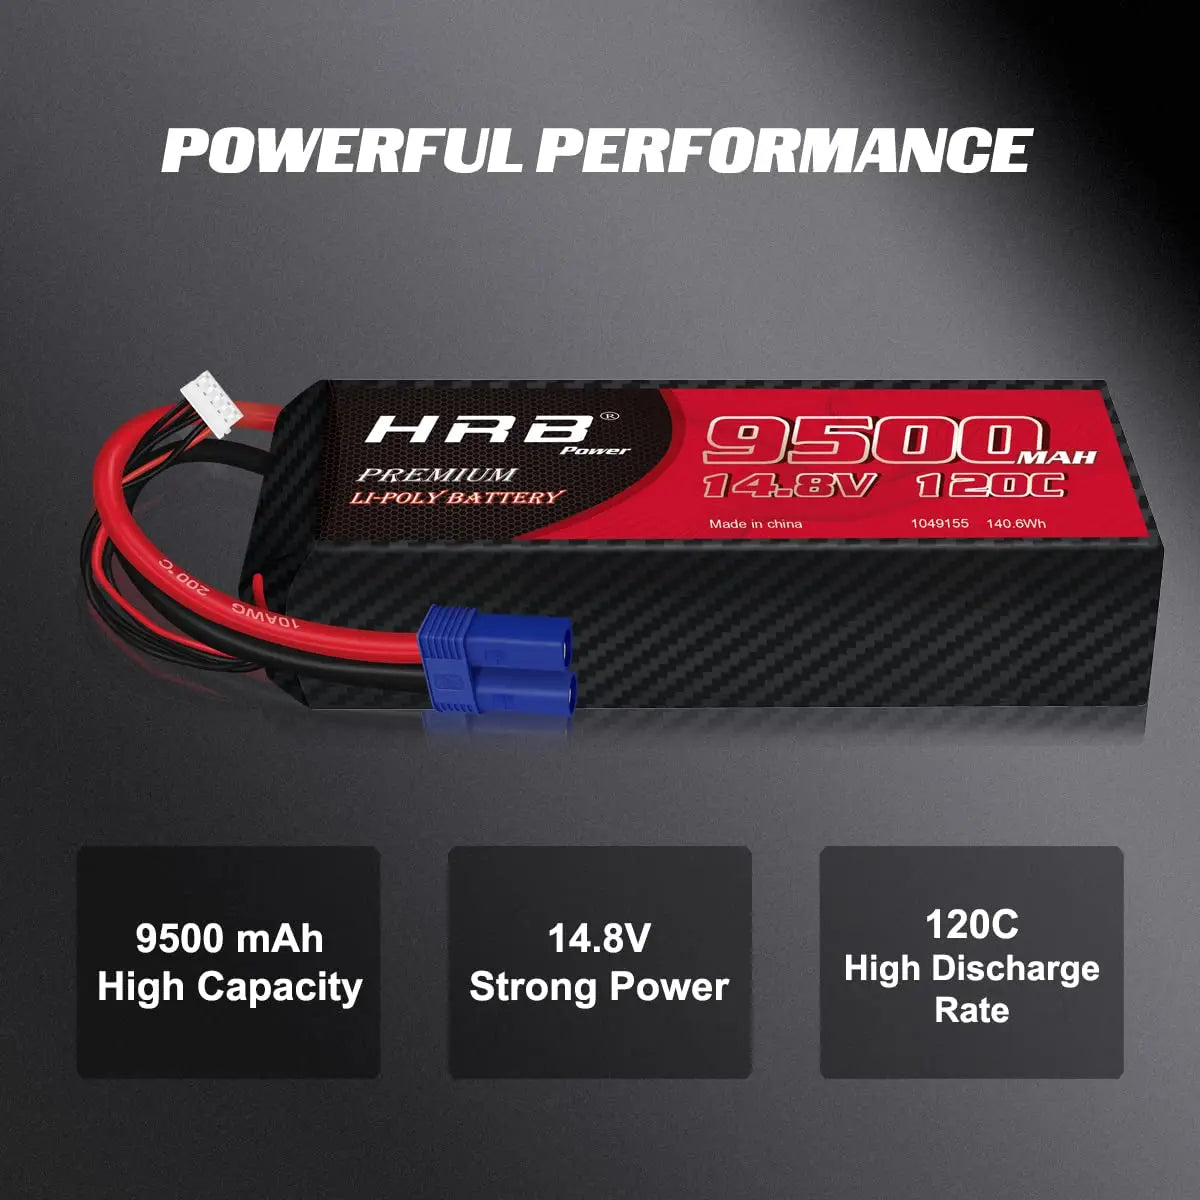 2PCS HRB RC Lipo 3S 4S 6S Battery, Made in china 1049155 140.6Wh 9500 mAh 14.8V 120C